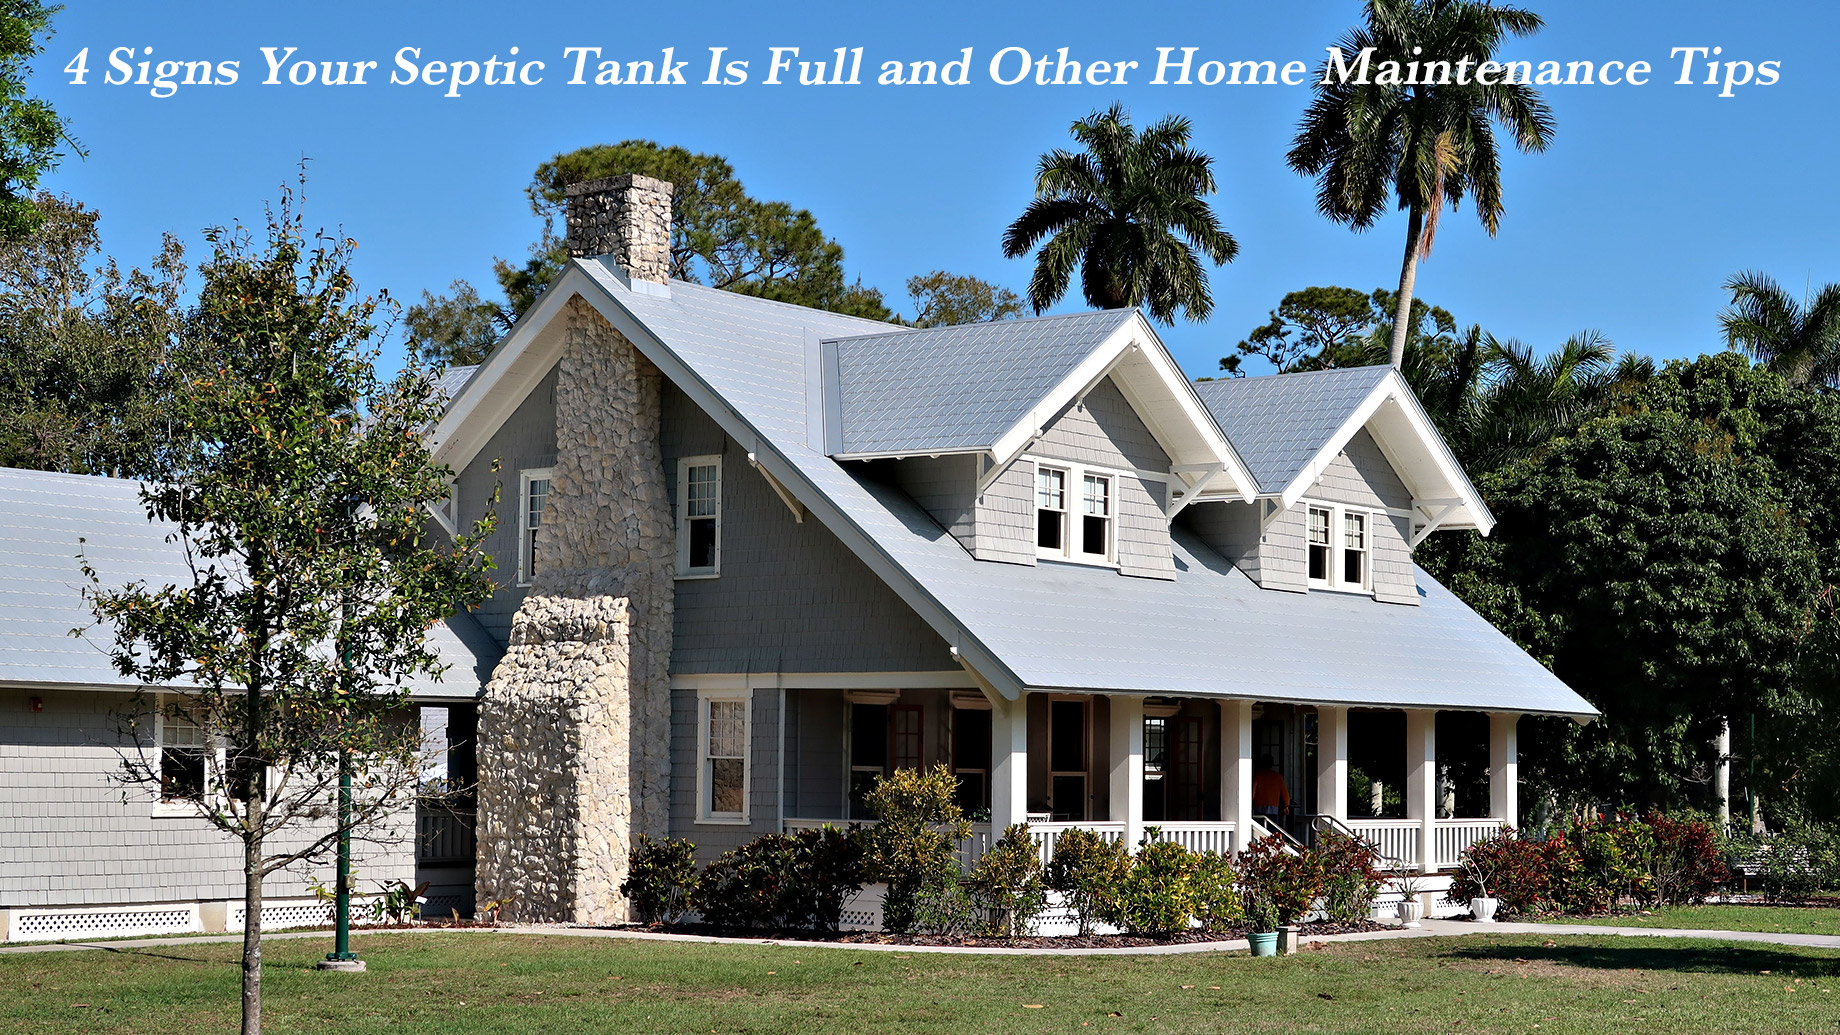 4 Signs Your Septic Tank Is Full and Other Home Maintenance Tips